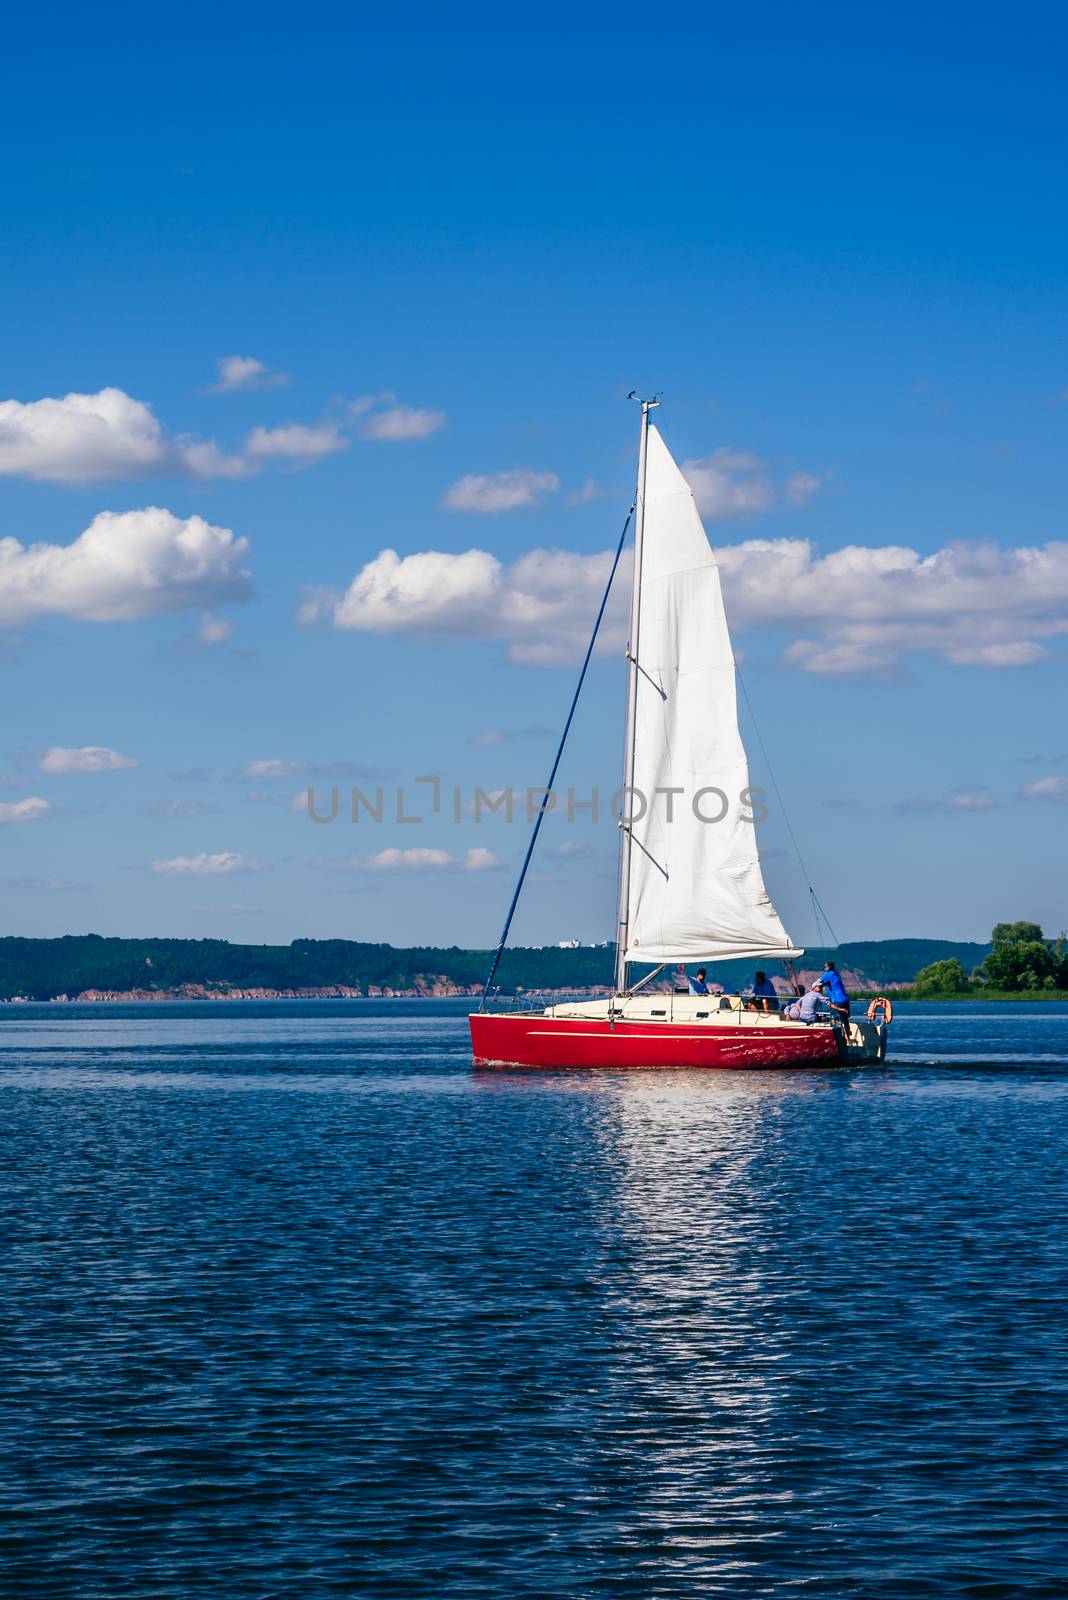 Red Sailing Boat on the River at Sunny Day.